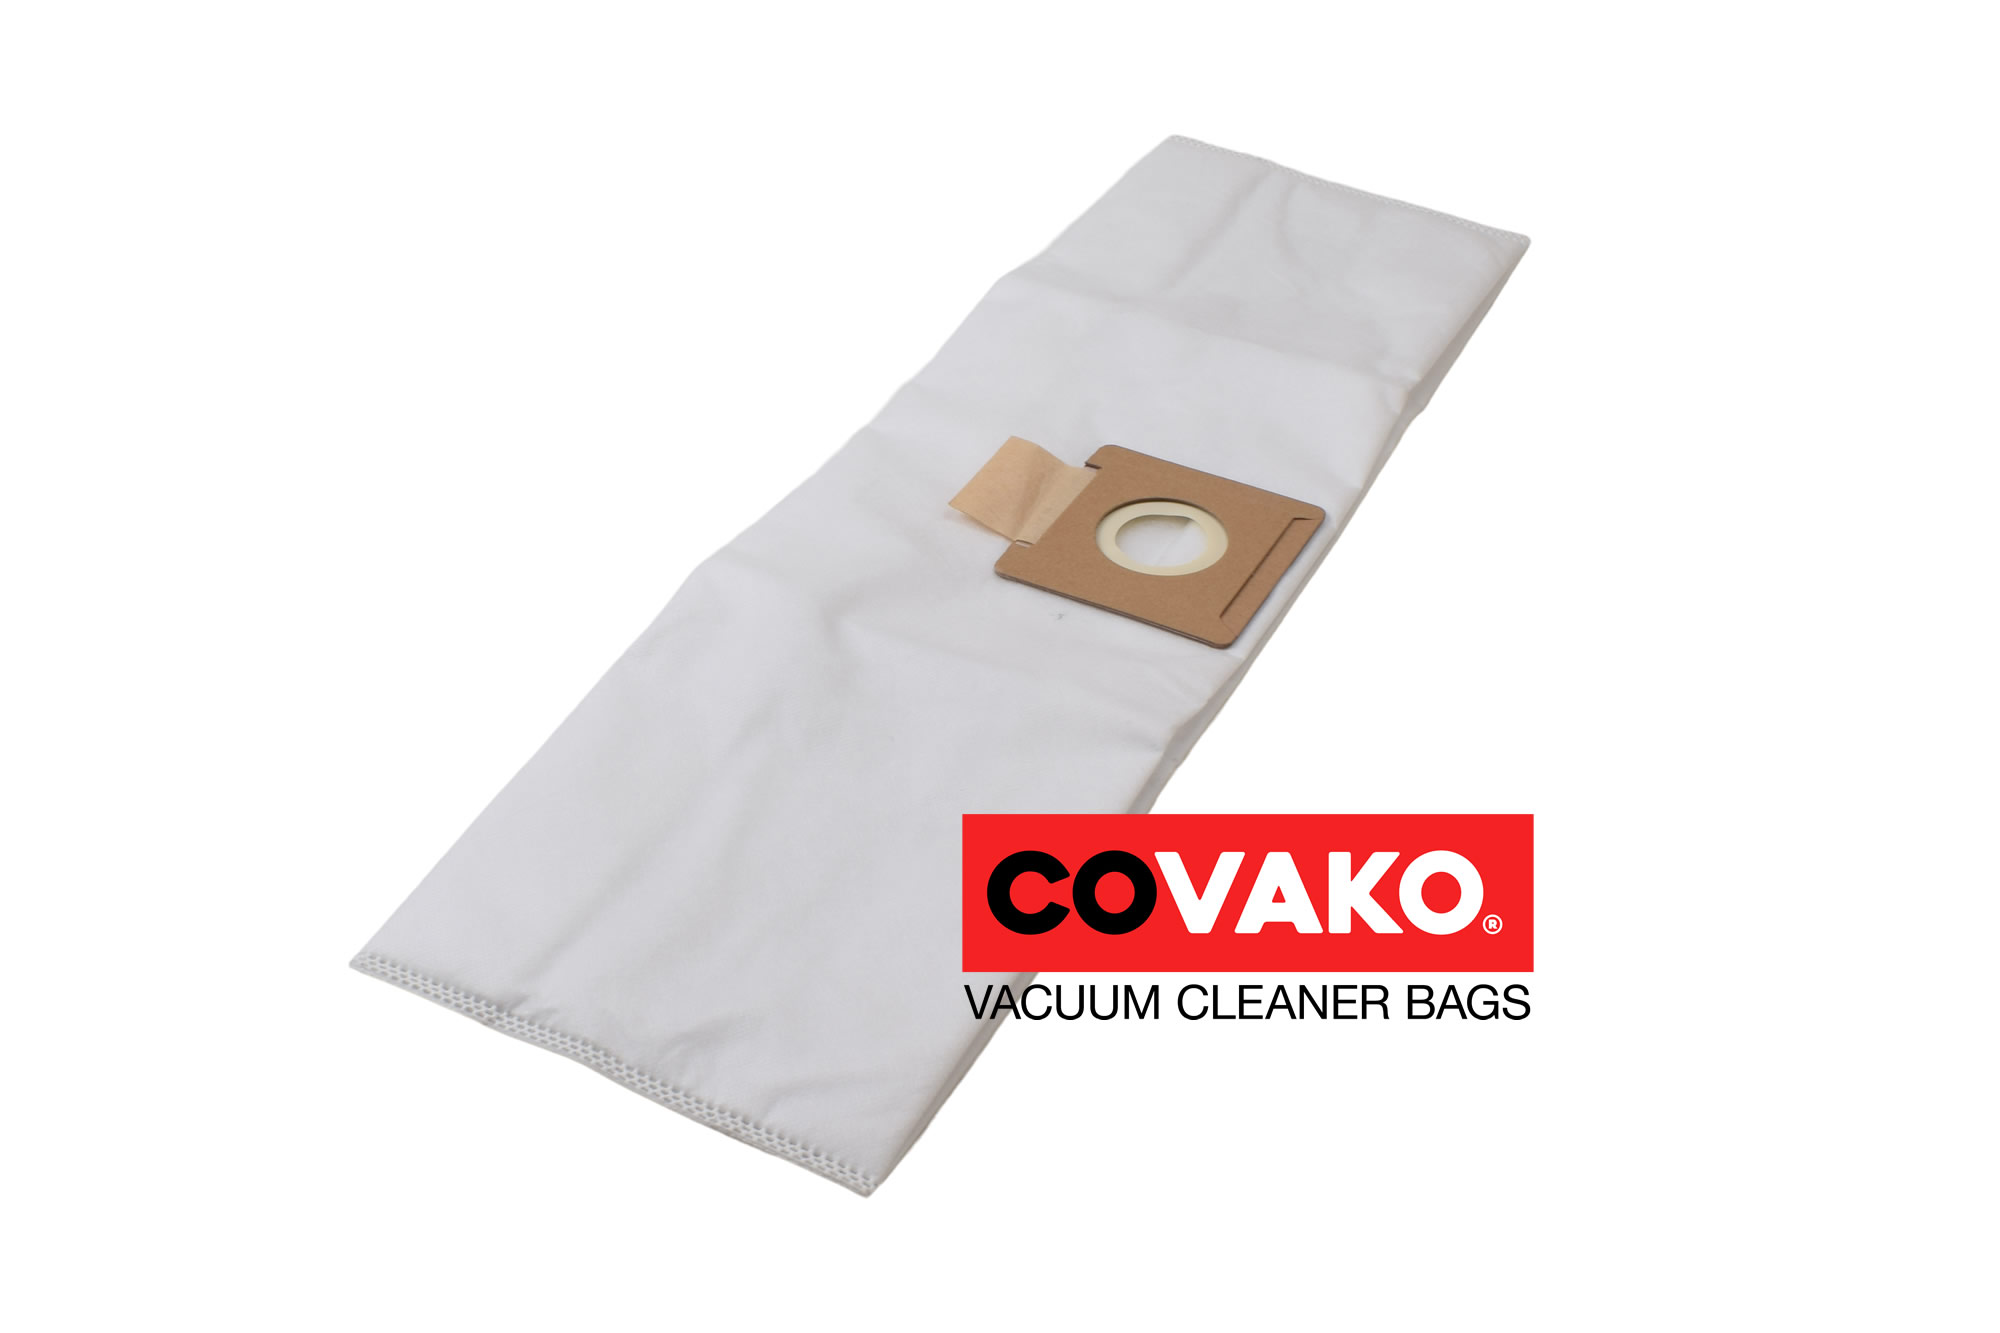 Gansow YP 1400/6 / Synthesis - Gansow vacuum cleaner bags